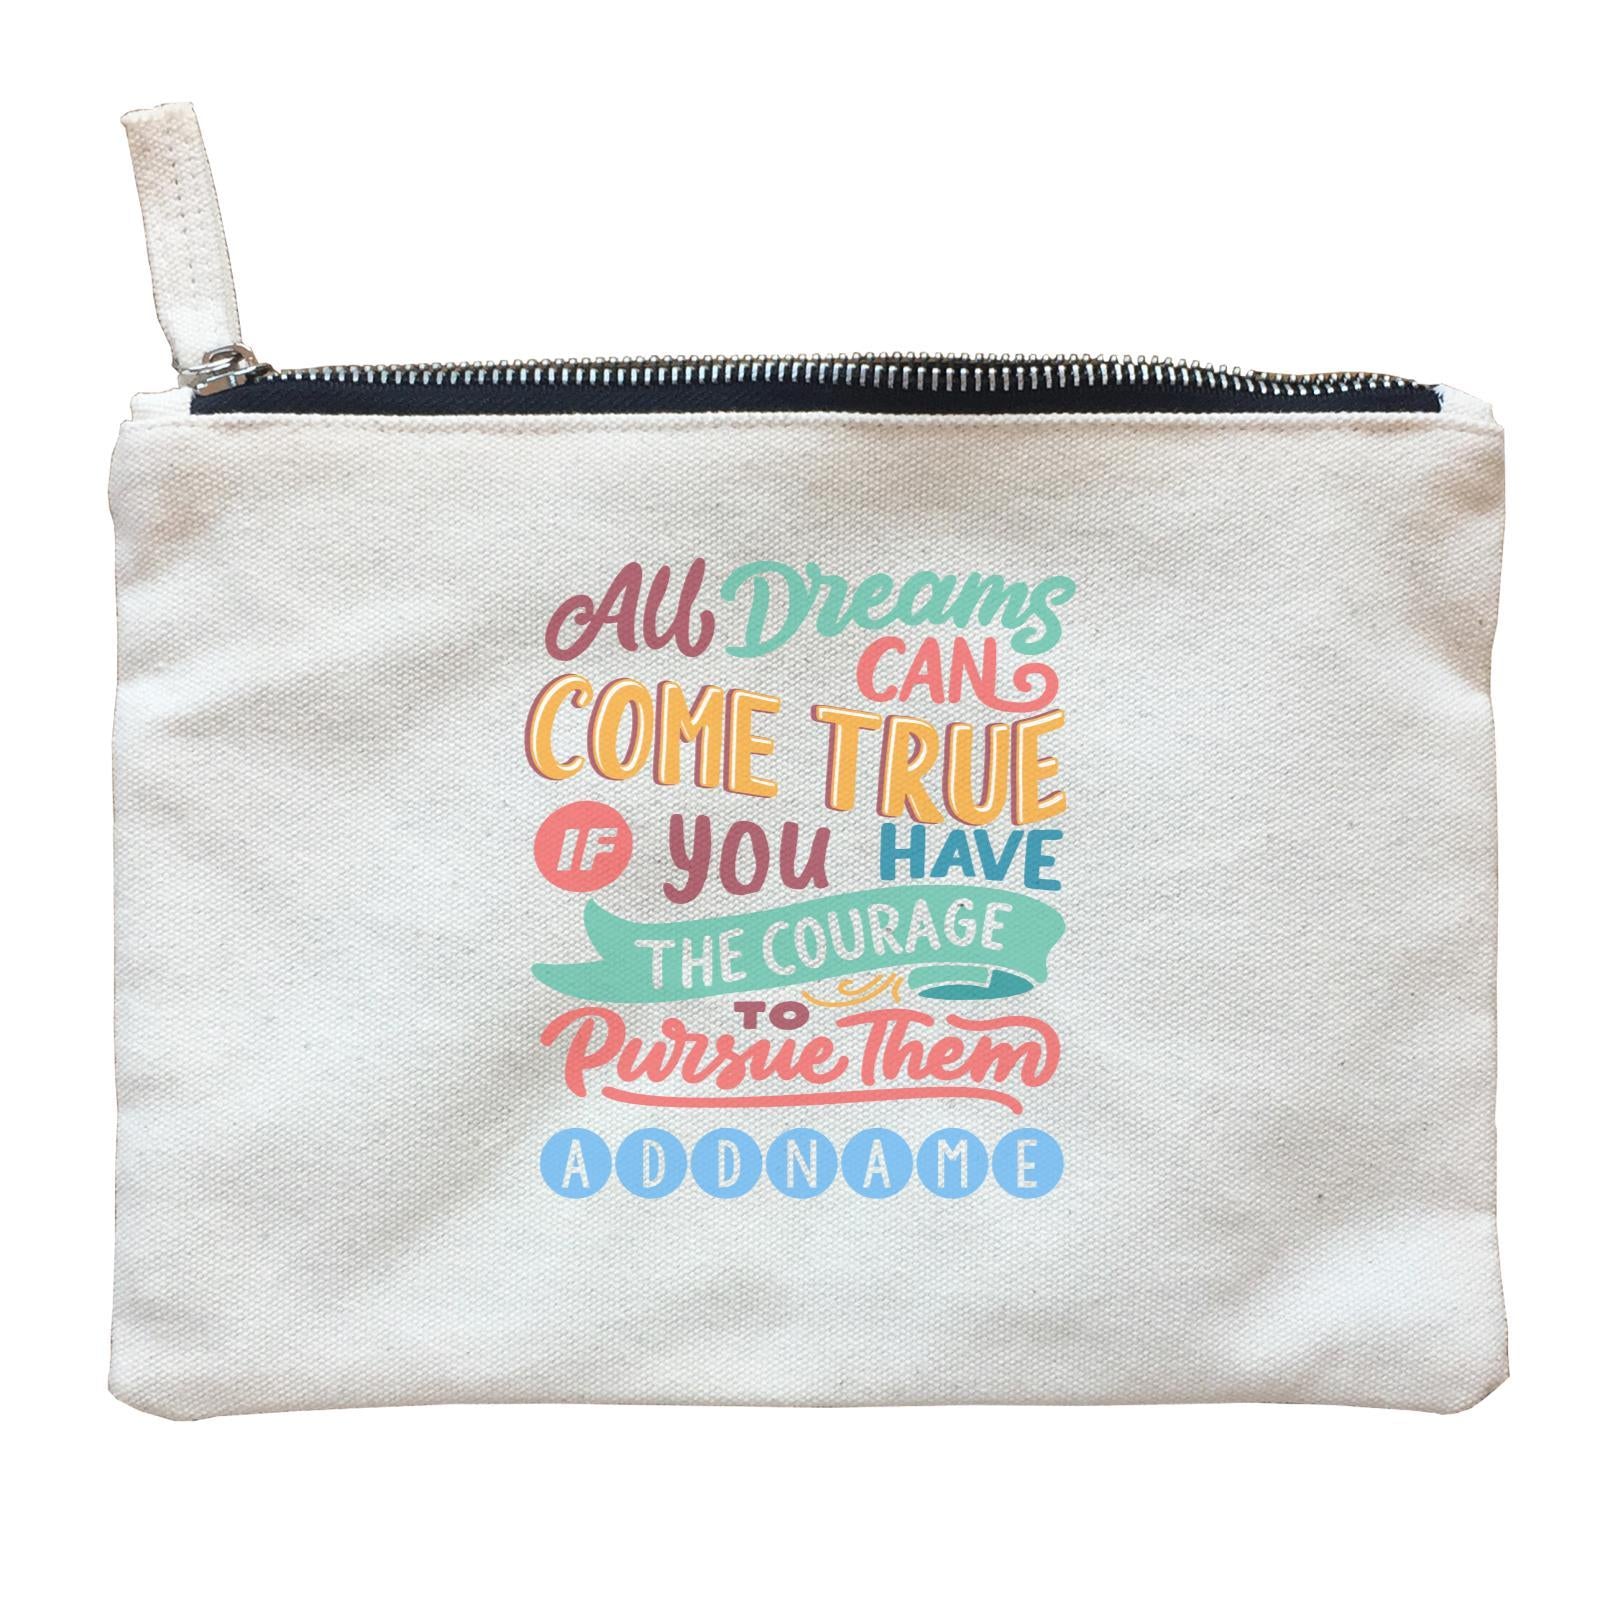 Children's Day Gift Series All Dreams Can Come True Addname  Zipper Pouch